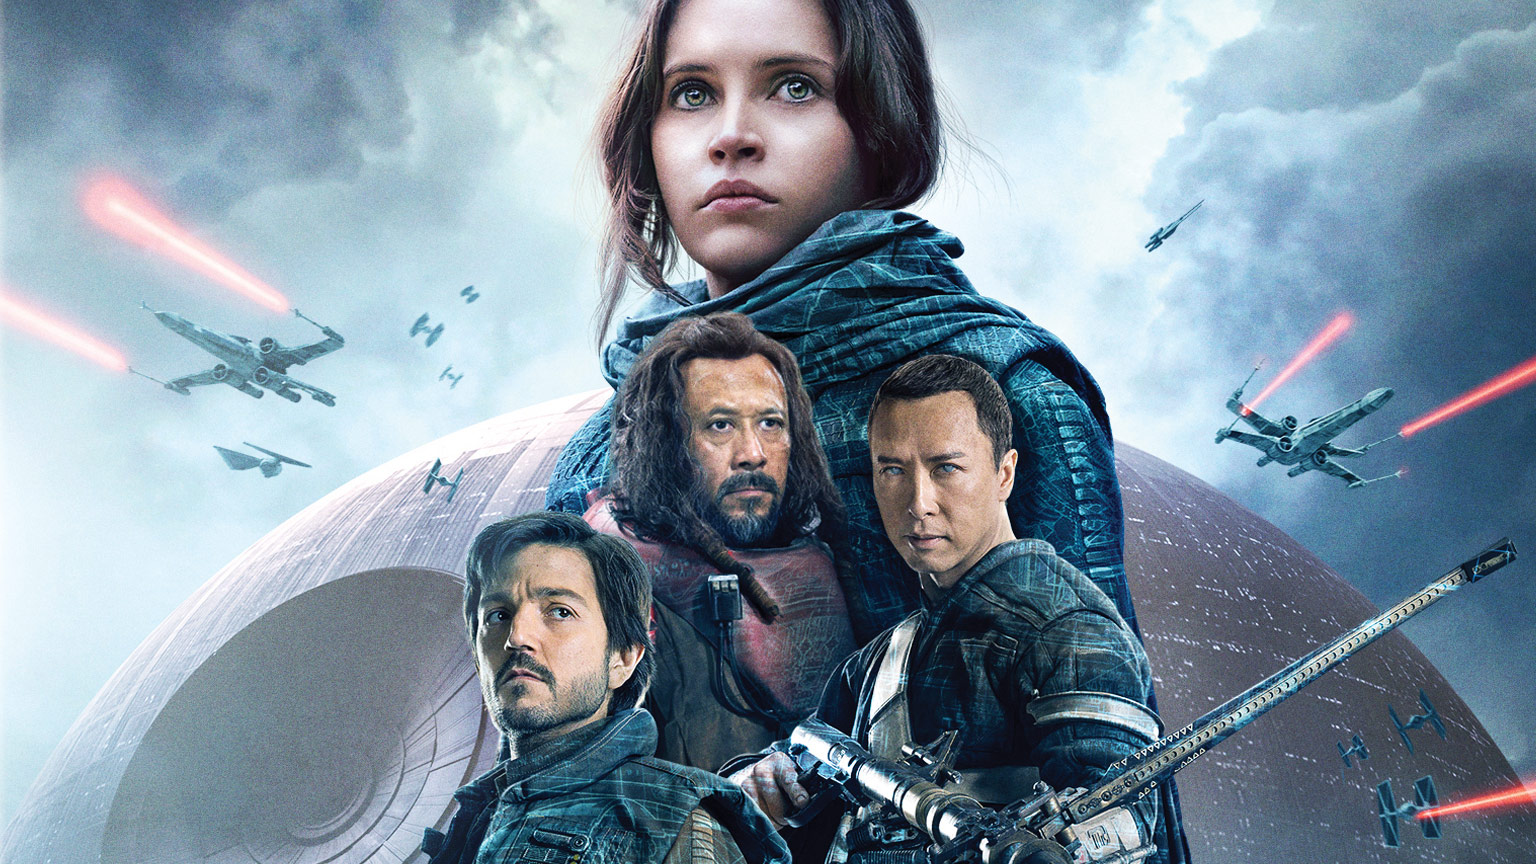 Film - Rogue One: A Star Wars Story